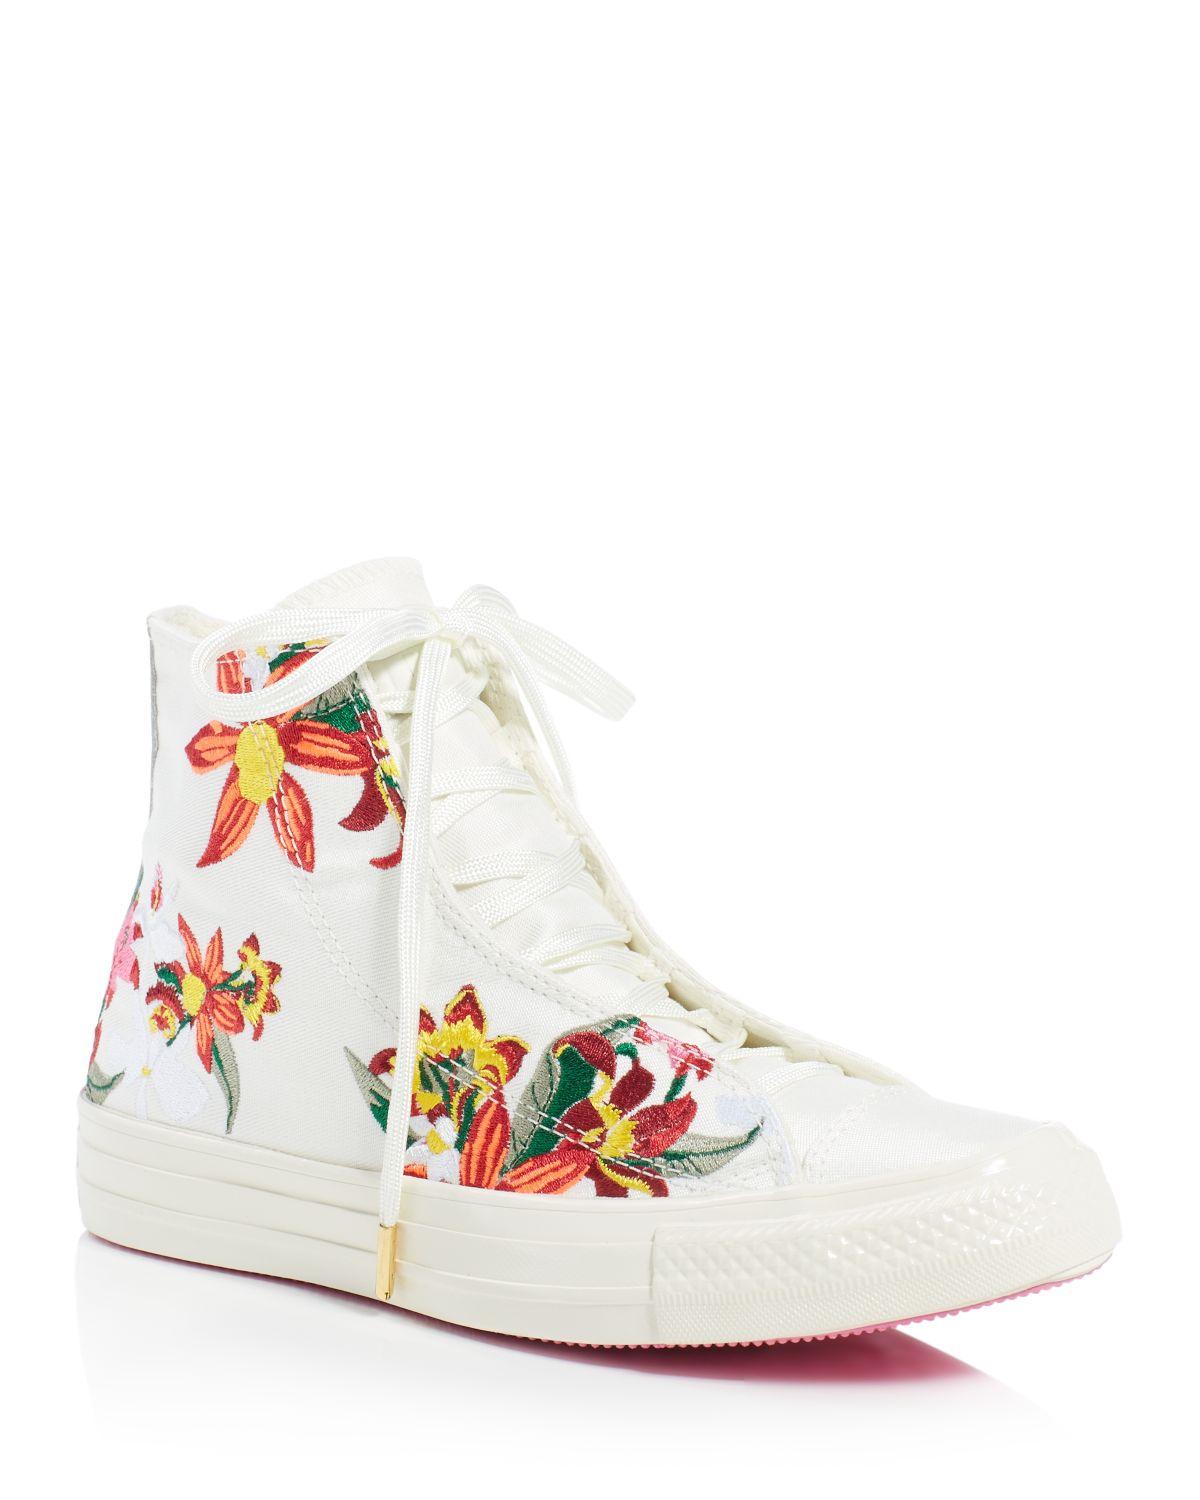 Converse Leather Patbo Collection Chuck Taylor All Star Floral ... جودي صاحب الظل الطويل